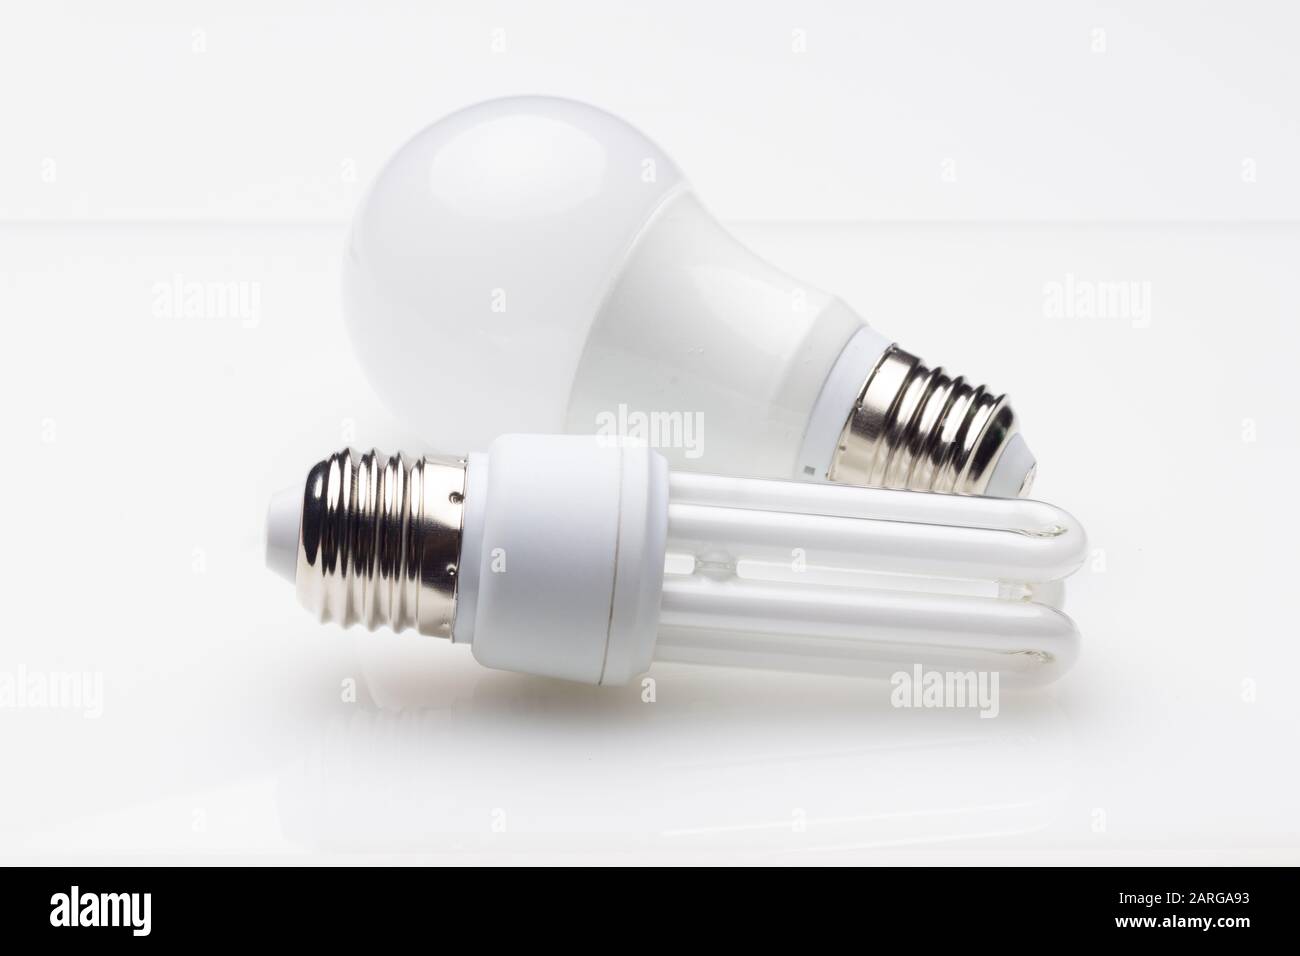 Low consumption, less heat, responsible consumption with energy; energy saving light bulbs and maximum brightness to see well, read well; Perfectly il Stock Photo